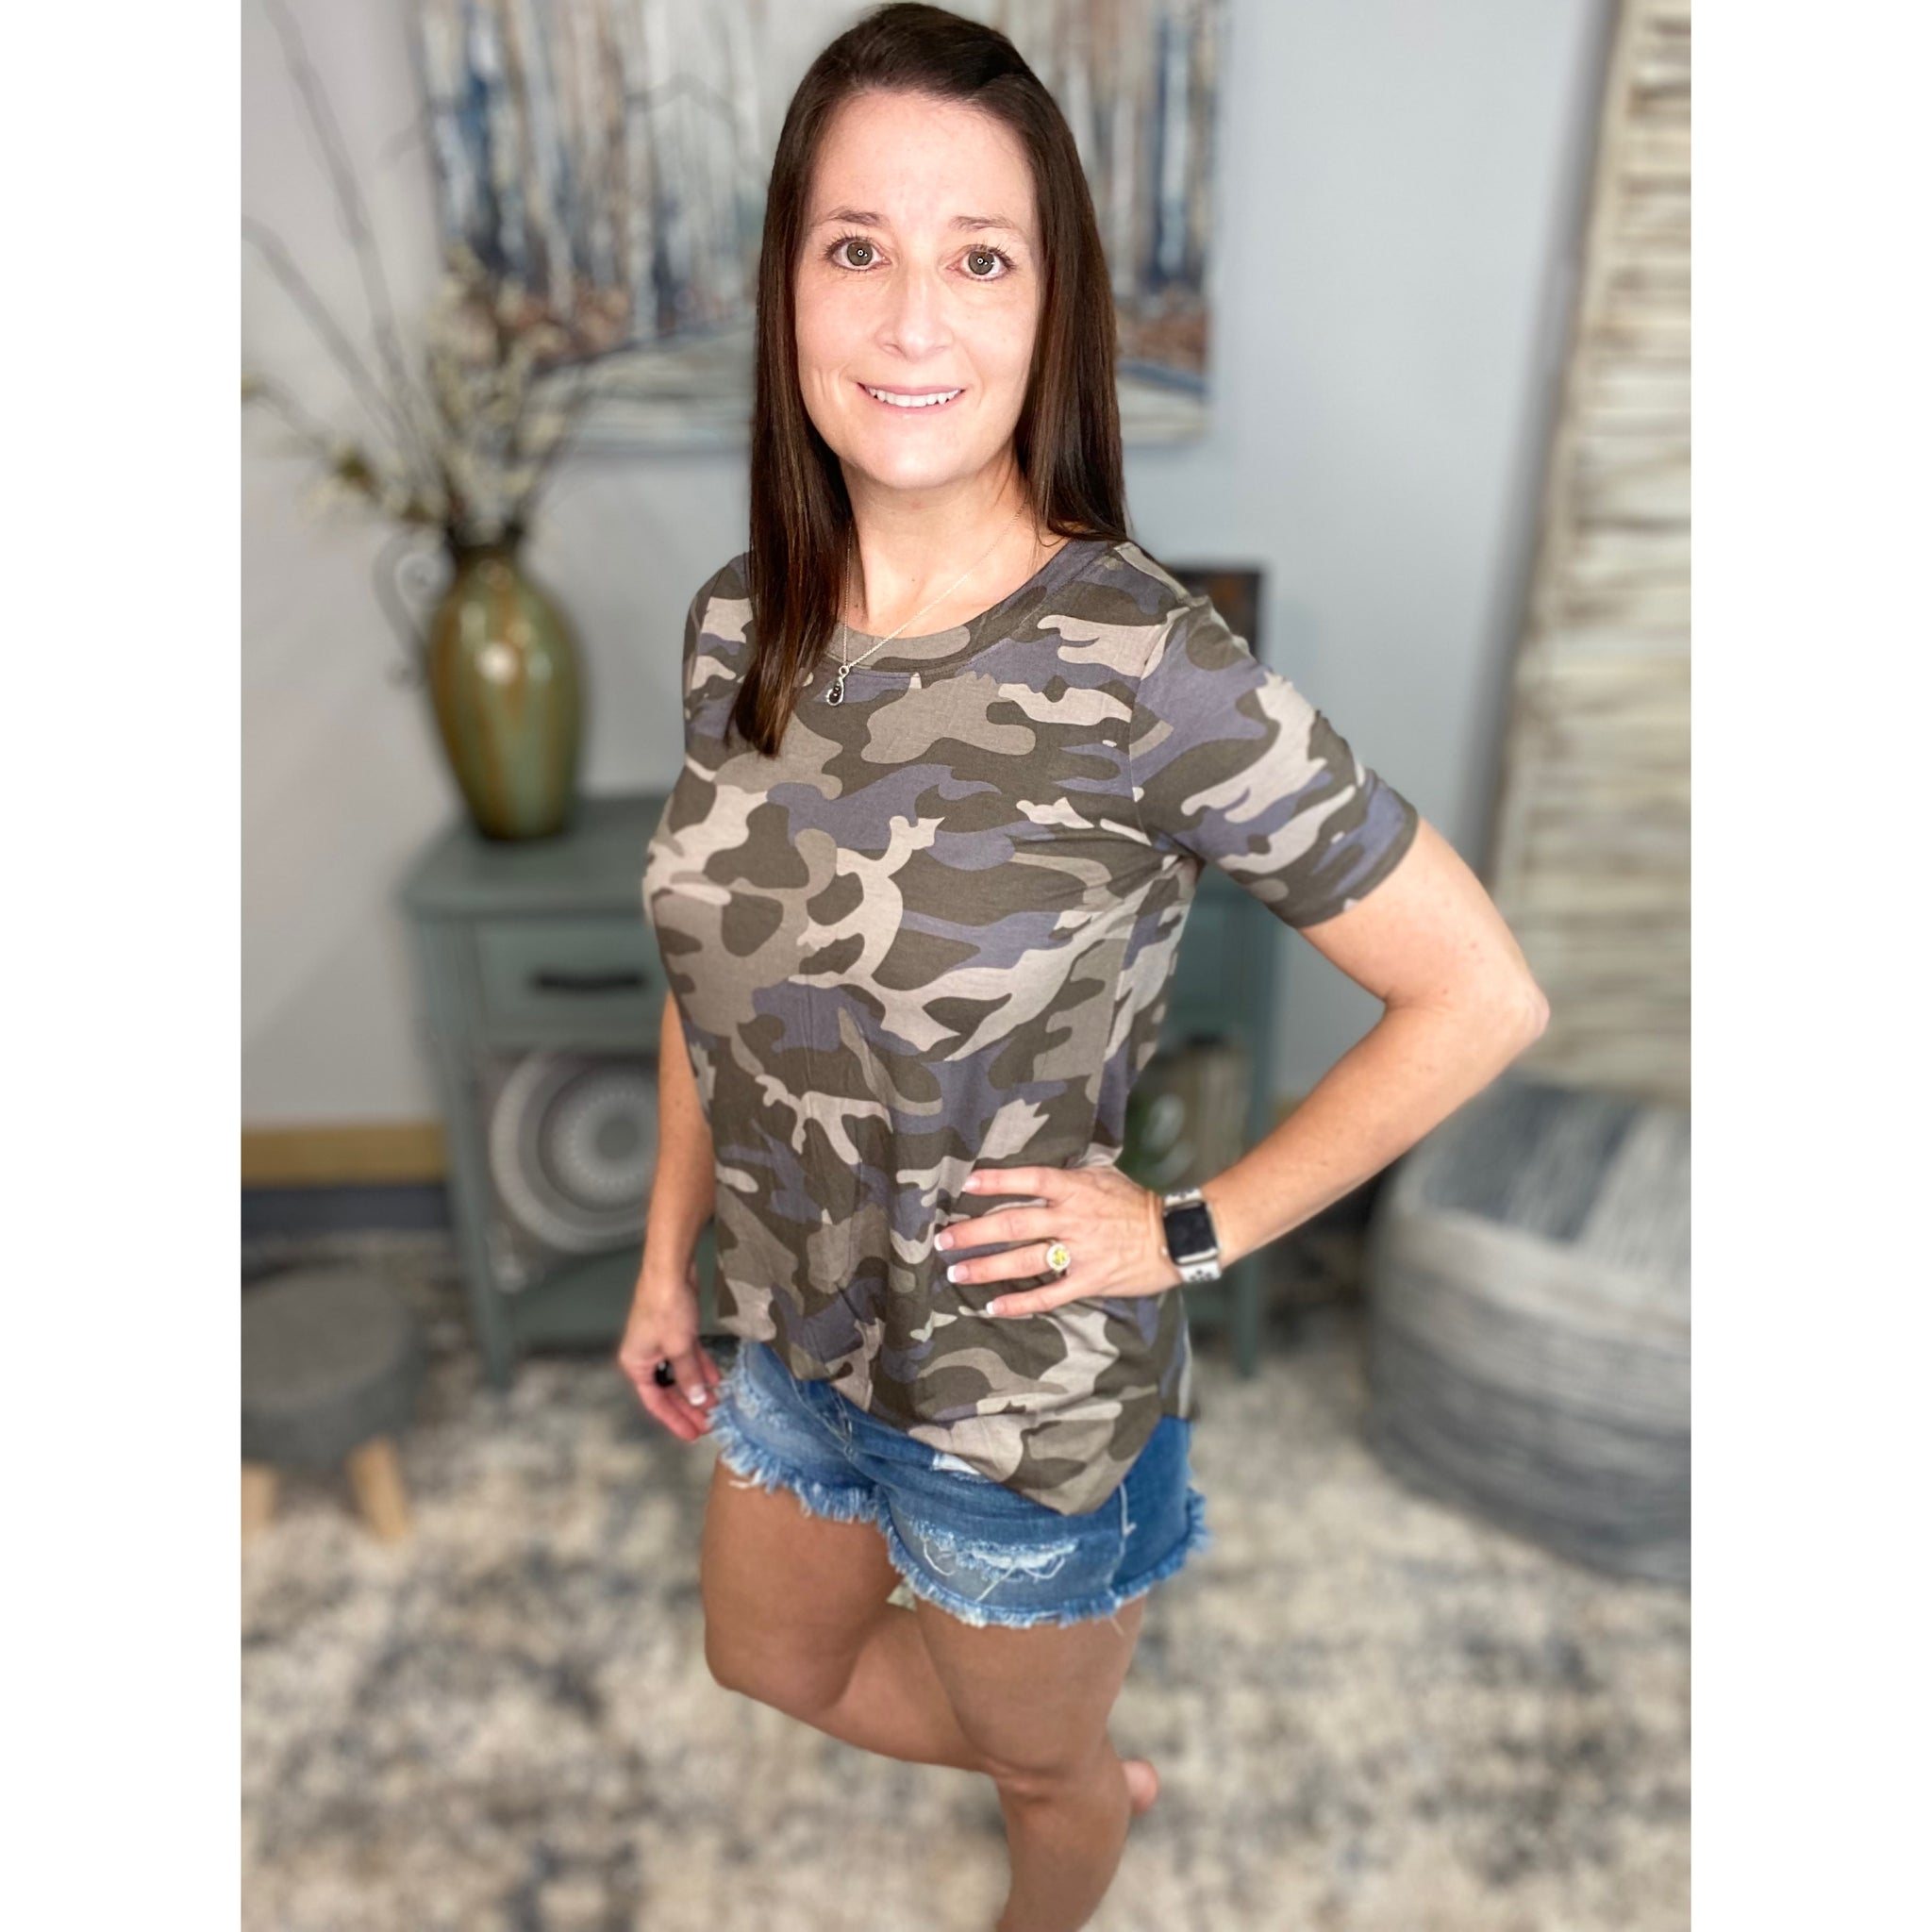 "Summertime Tee" Camouflage Loose Floaty Round Neck Pocket Boyfriend Tee Shirt Army Green S/M/L/XL